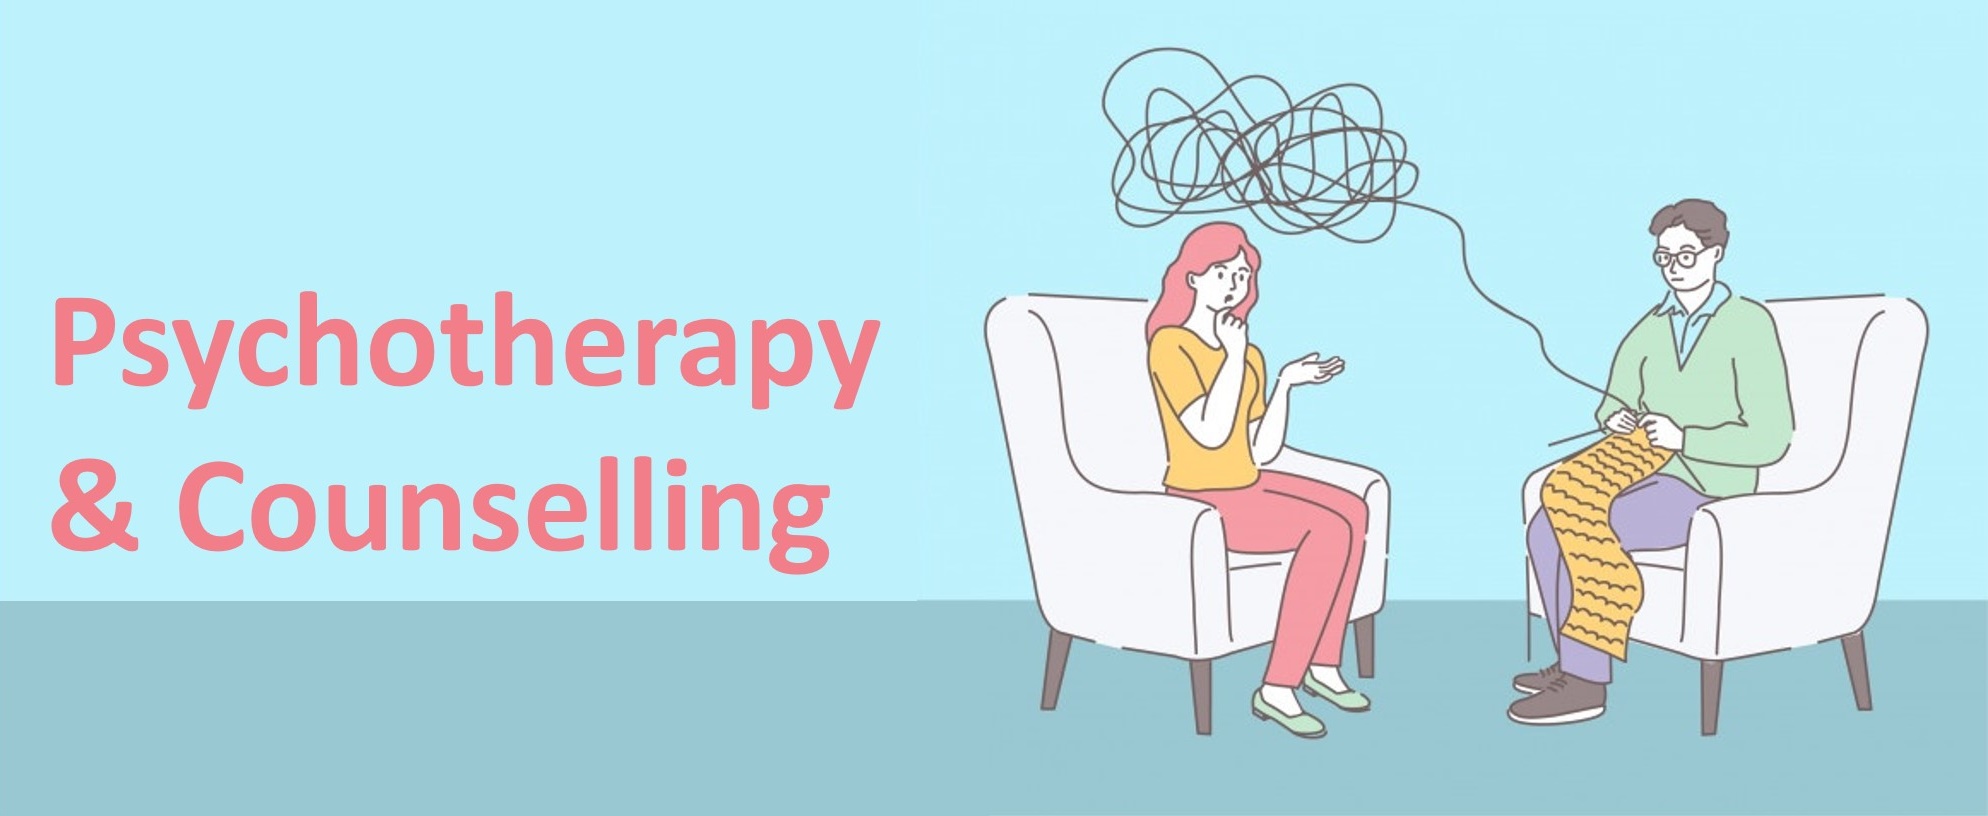 Psychotherapy & Counselling